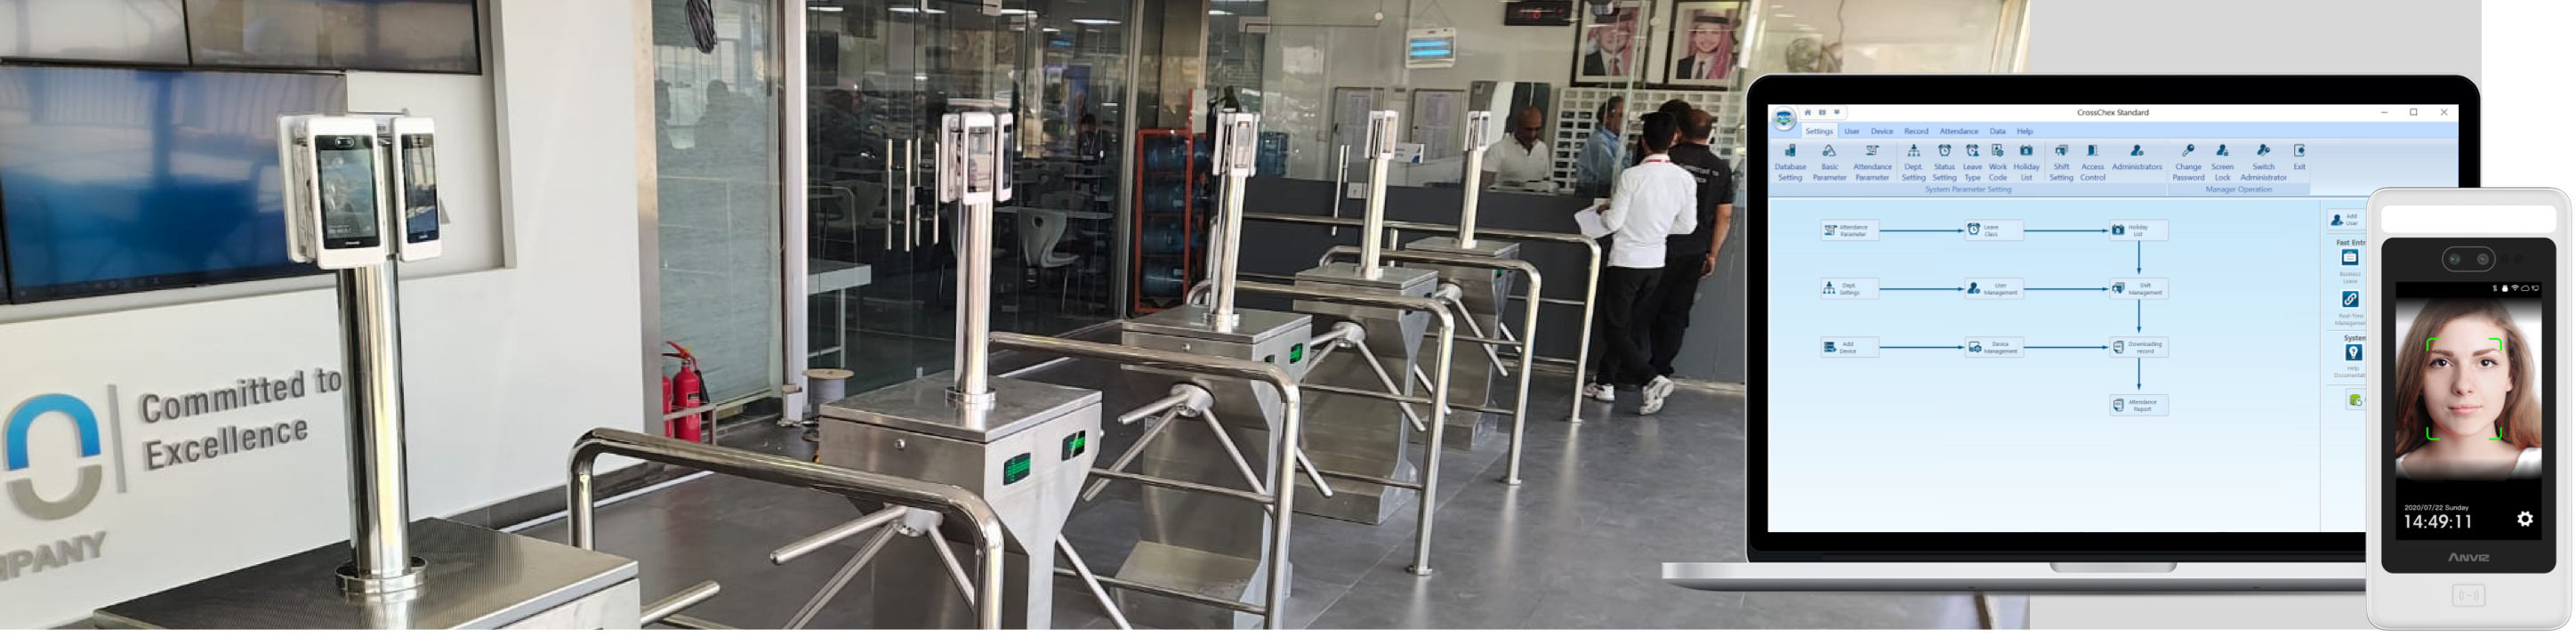 face recognition application on airport turnstile gates